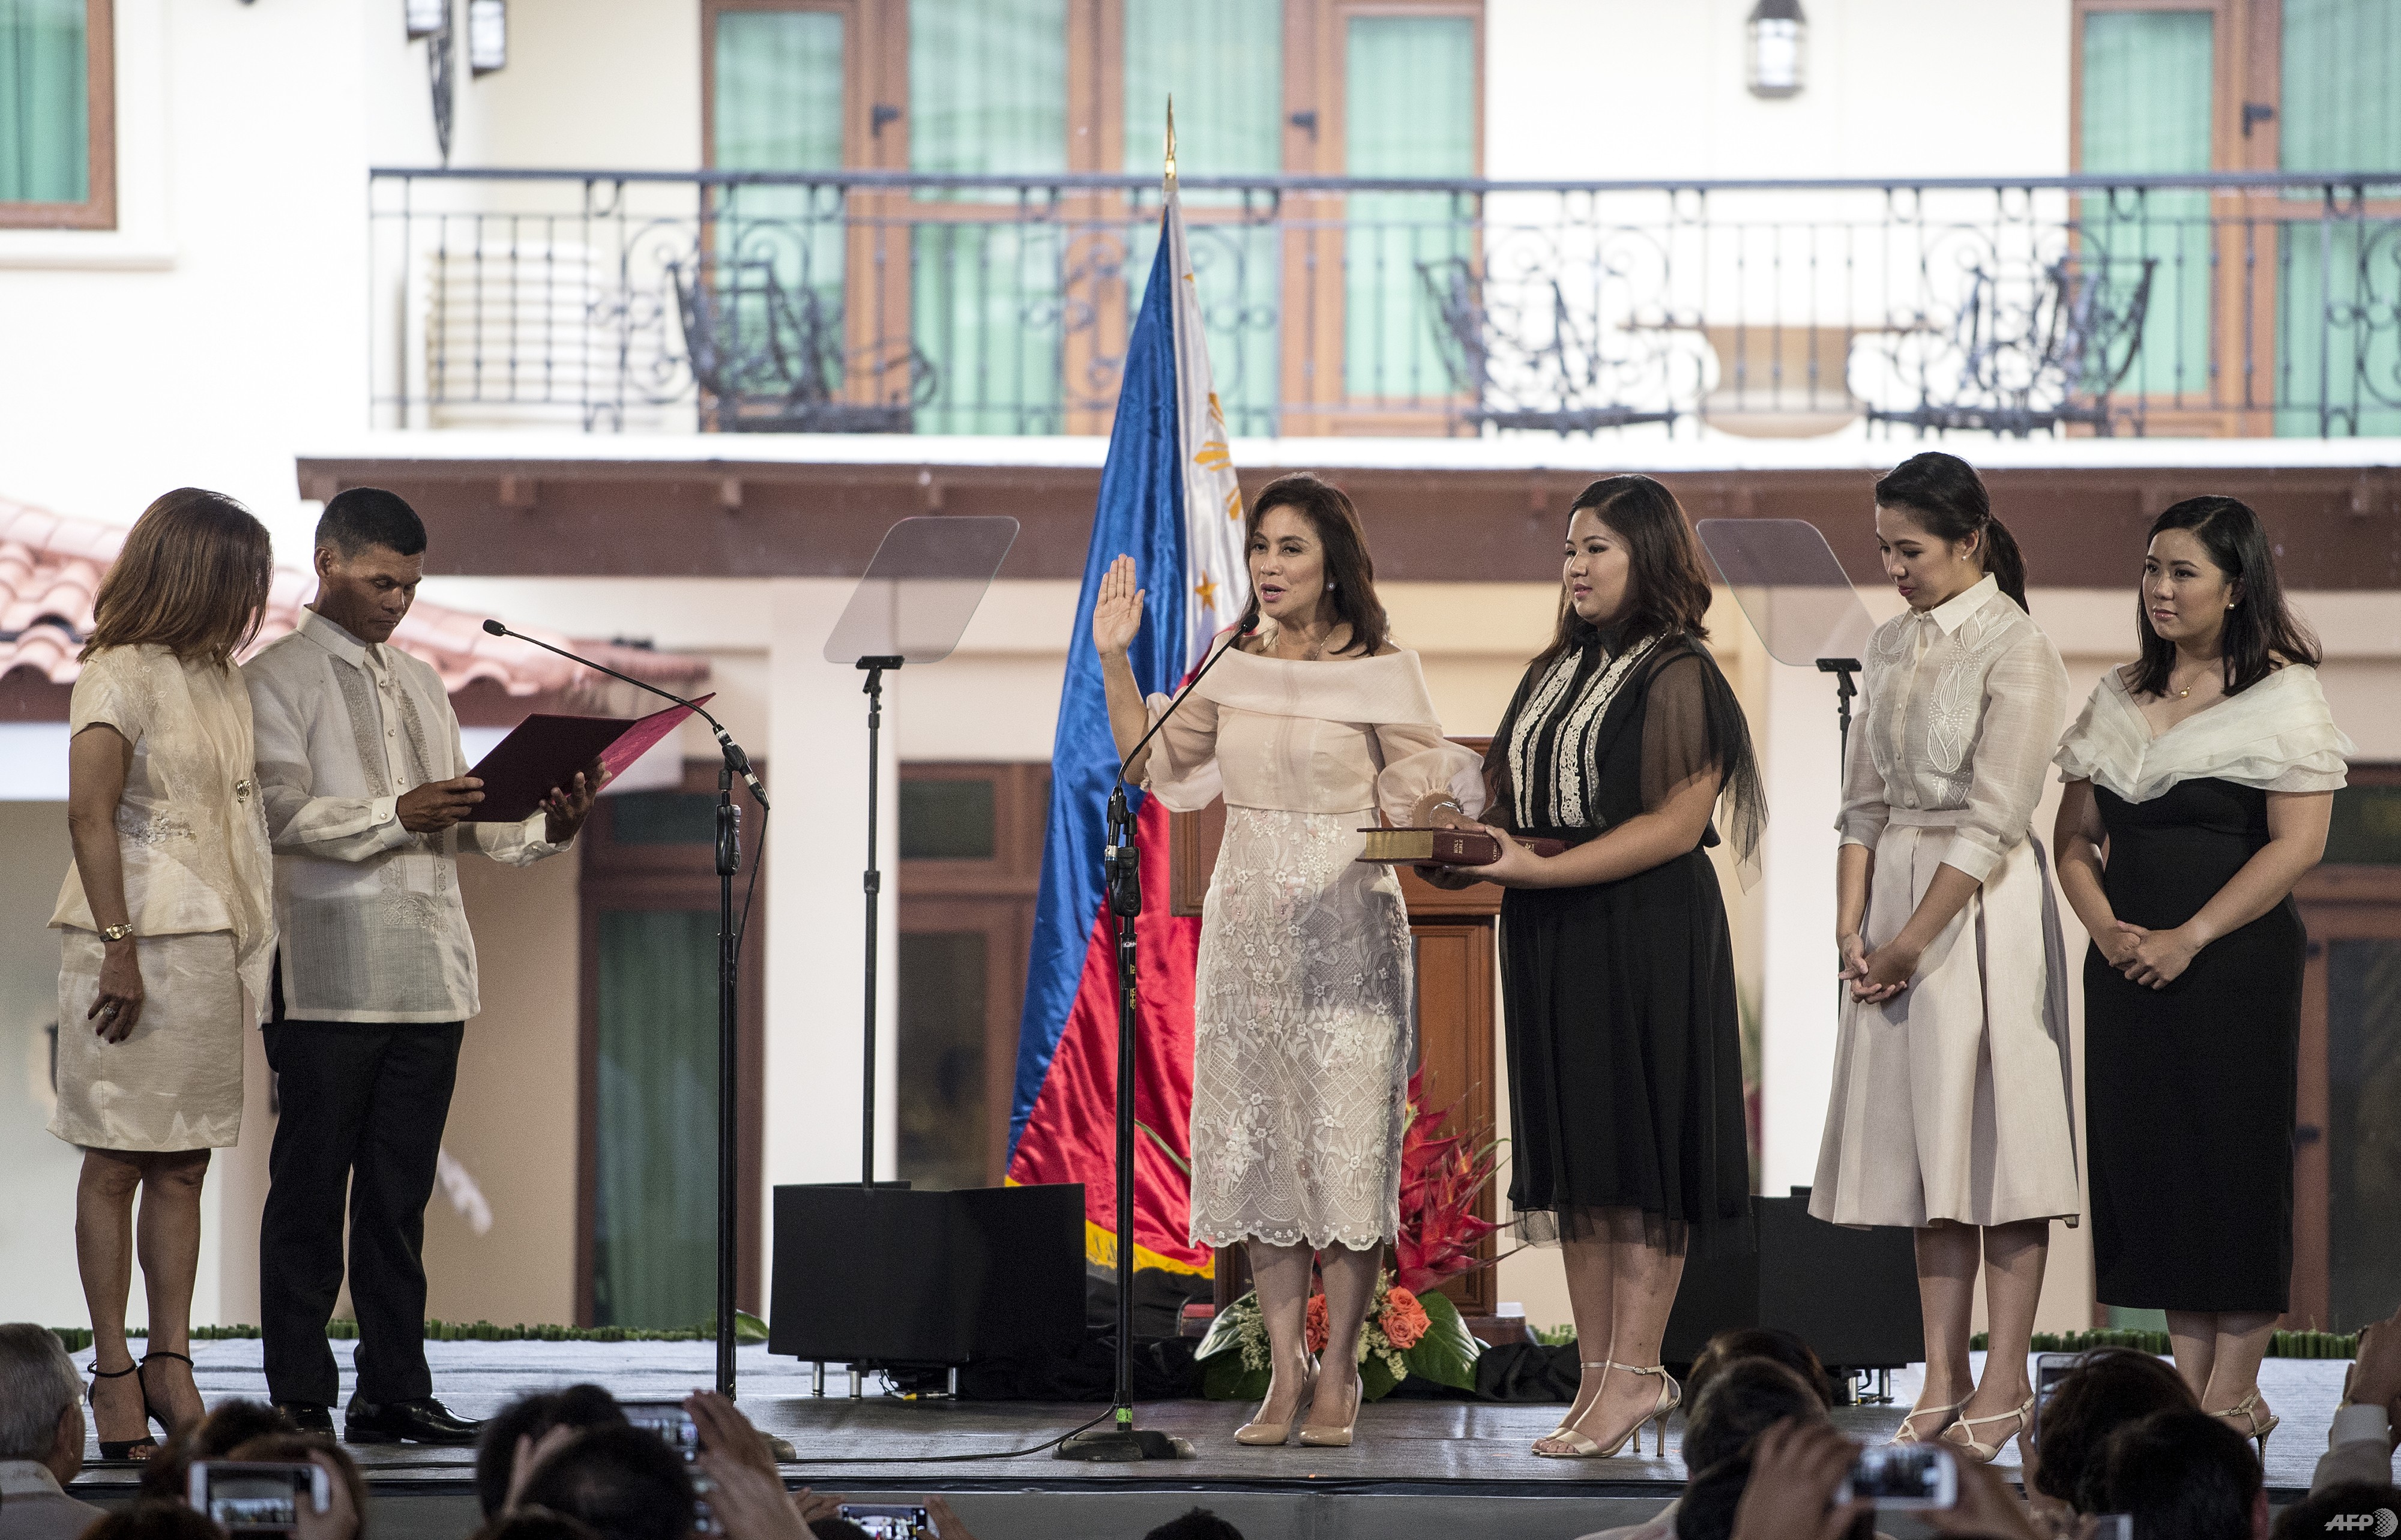 Philippines Vice President Leni Robredo (L) takes an oath administered by Barangay Captain Ronaldo Coner (2nd L) during her inauguration ceremonies with her daughters Jillian Therese (2nd L), Janine Patricia (2nd R) and Jessica Marie (R)at the Quezon City Recepotion House in Manila on June 30, 2016. / AFP PHOTO / NOEL CELIS